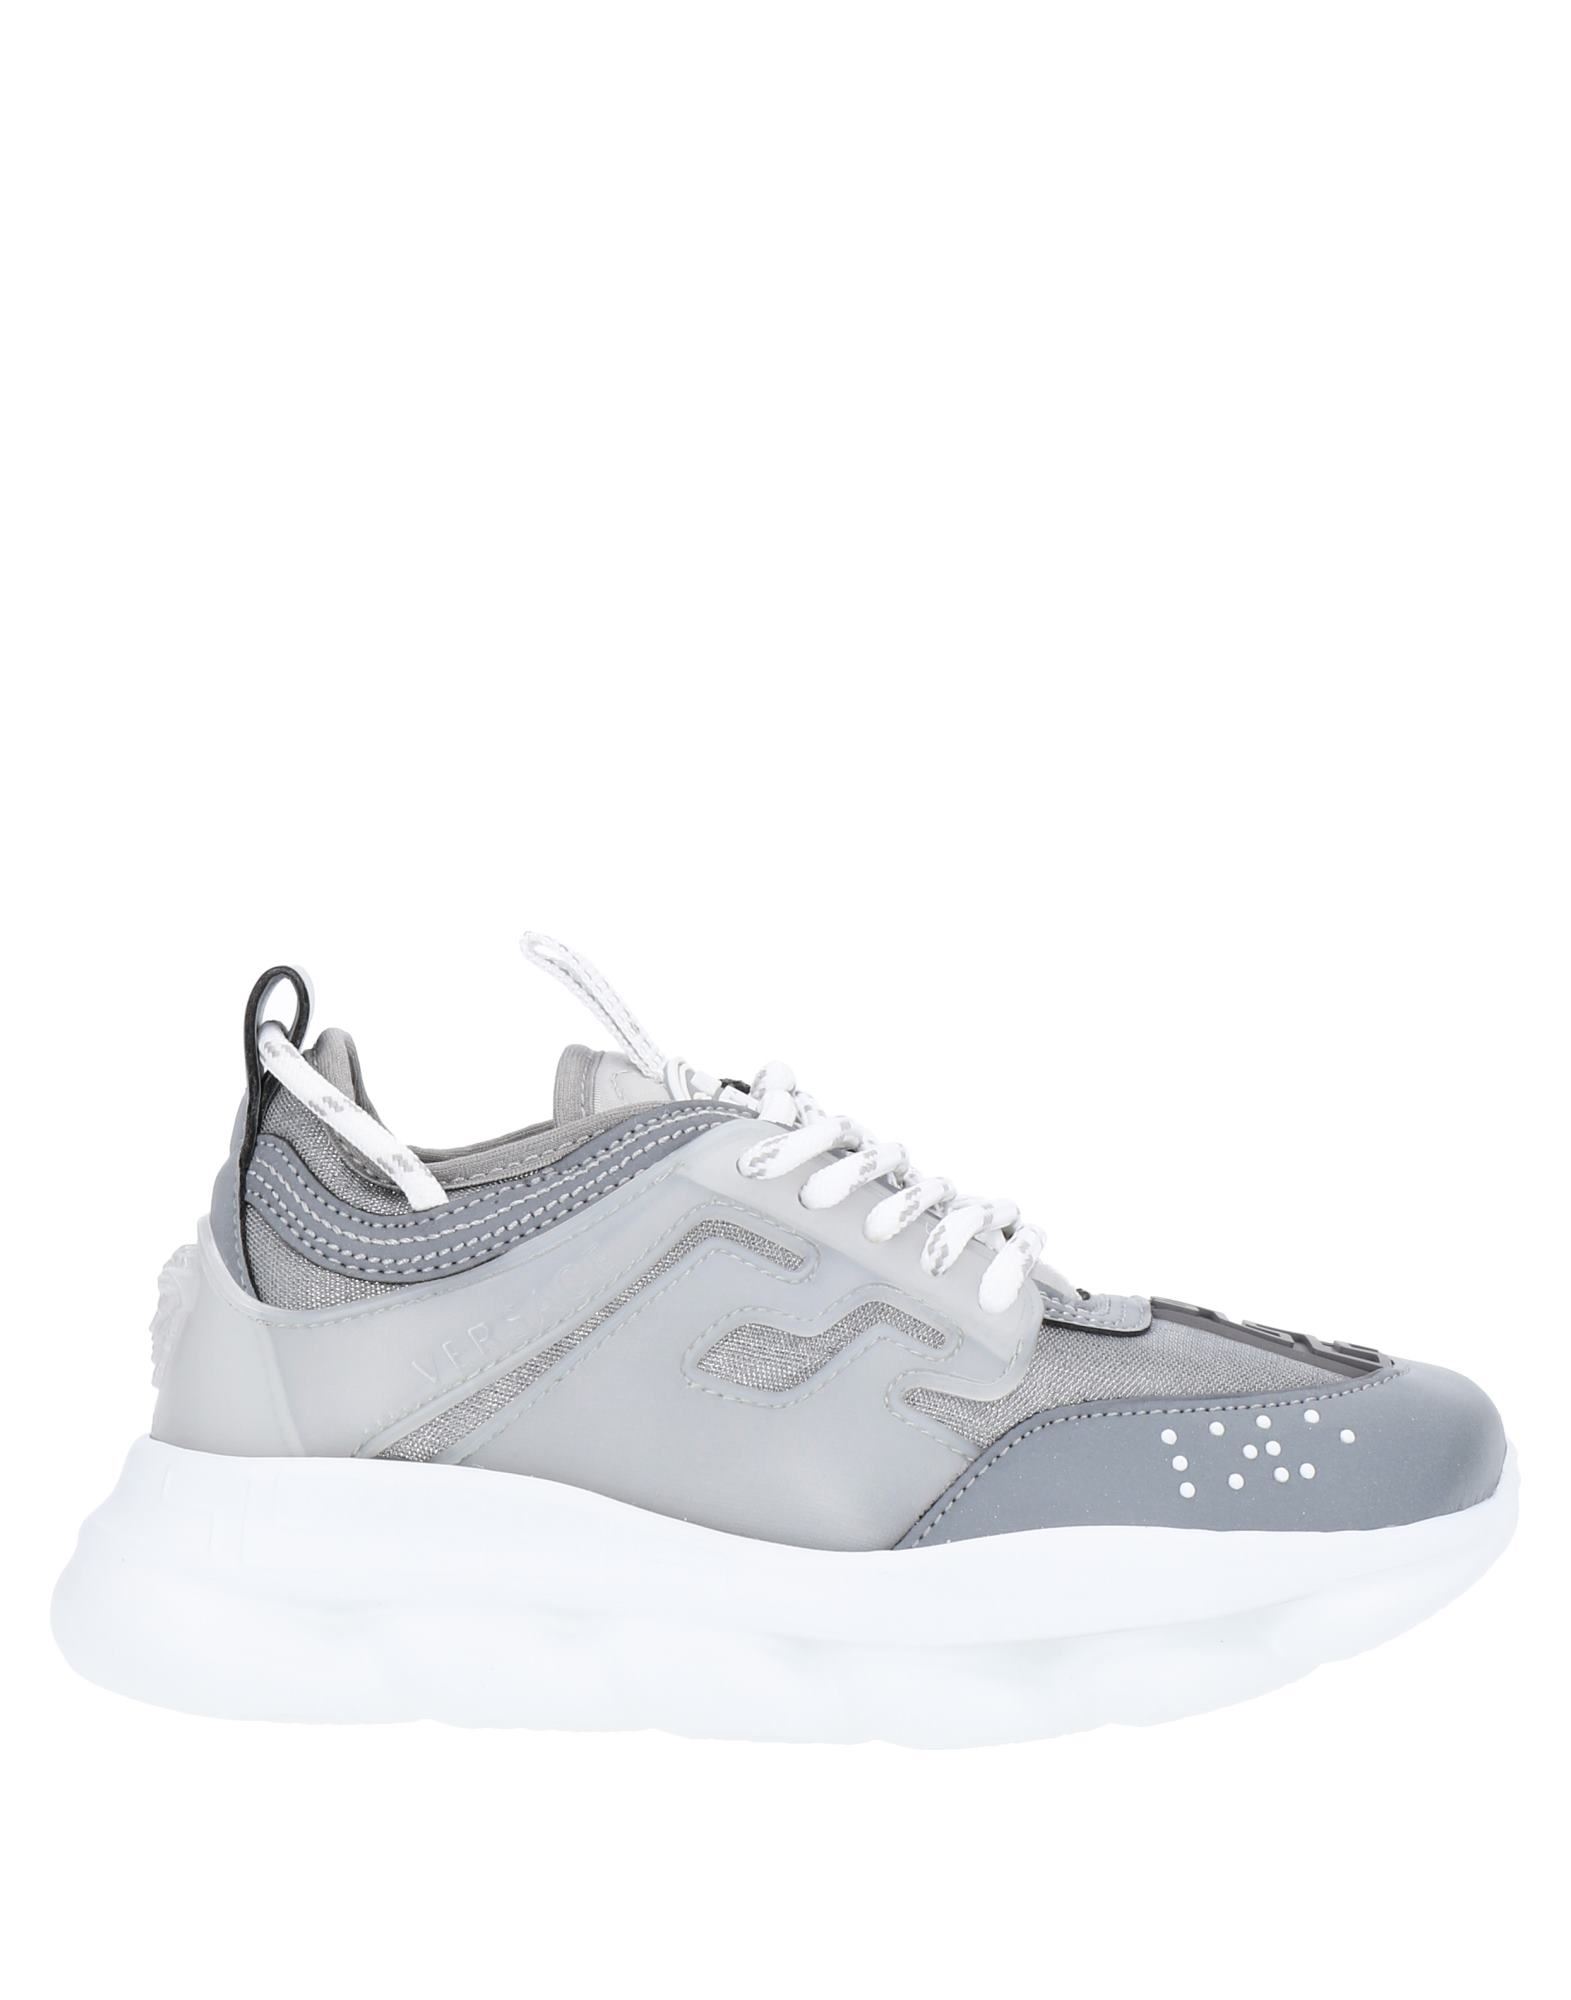 VERSACE YOUNG Sneakers Kinder Grau von VERSACE YOUNG